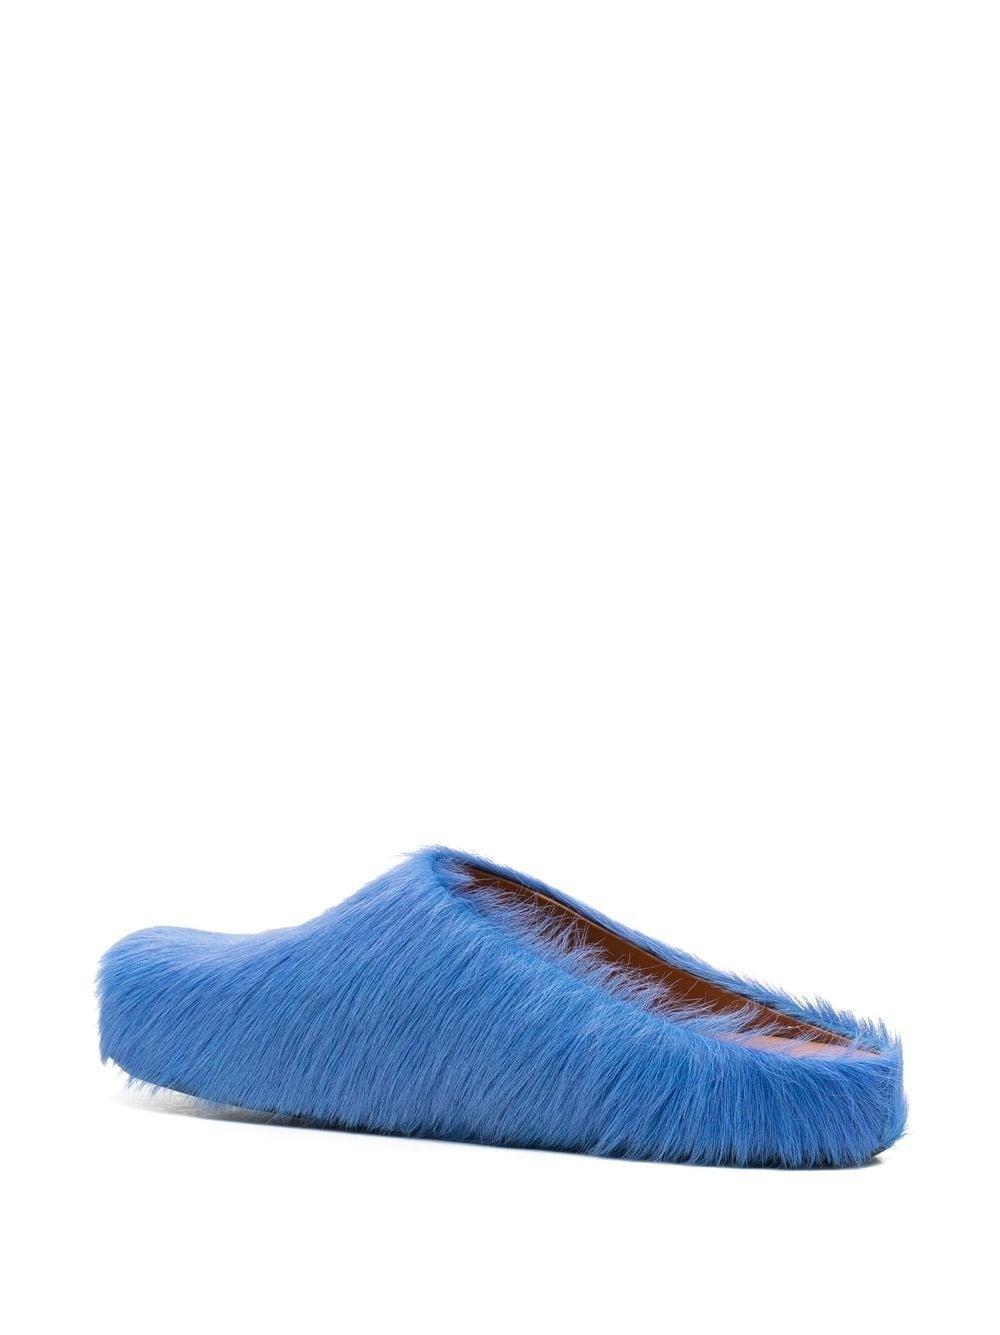 Mens Shoes Slip-on shoes Slippers Marni Fur Mule in Blue for Men 